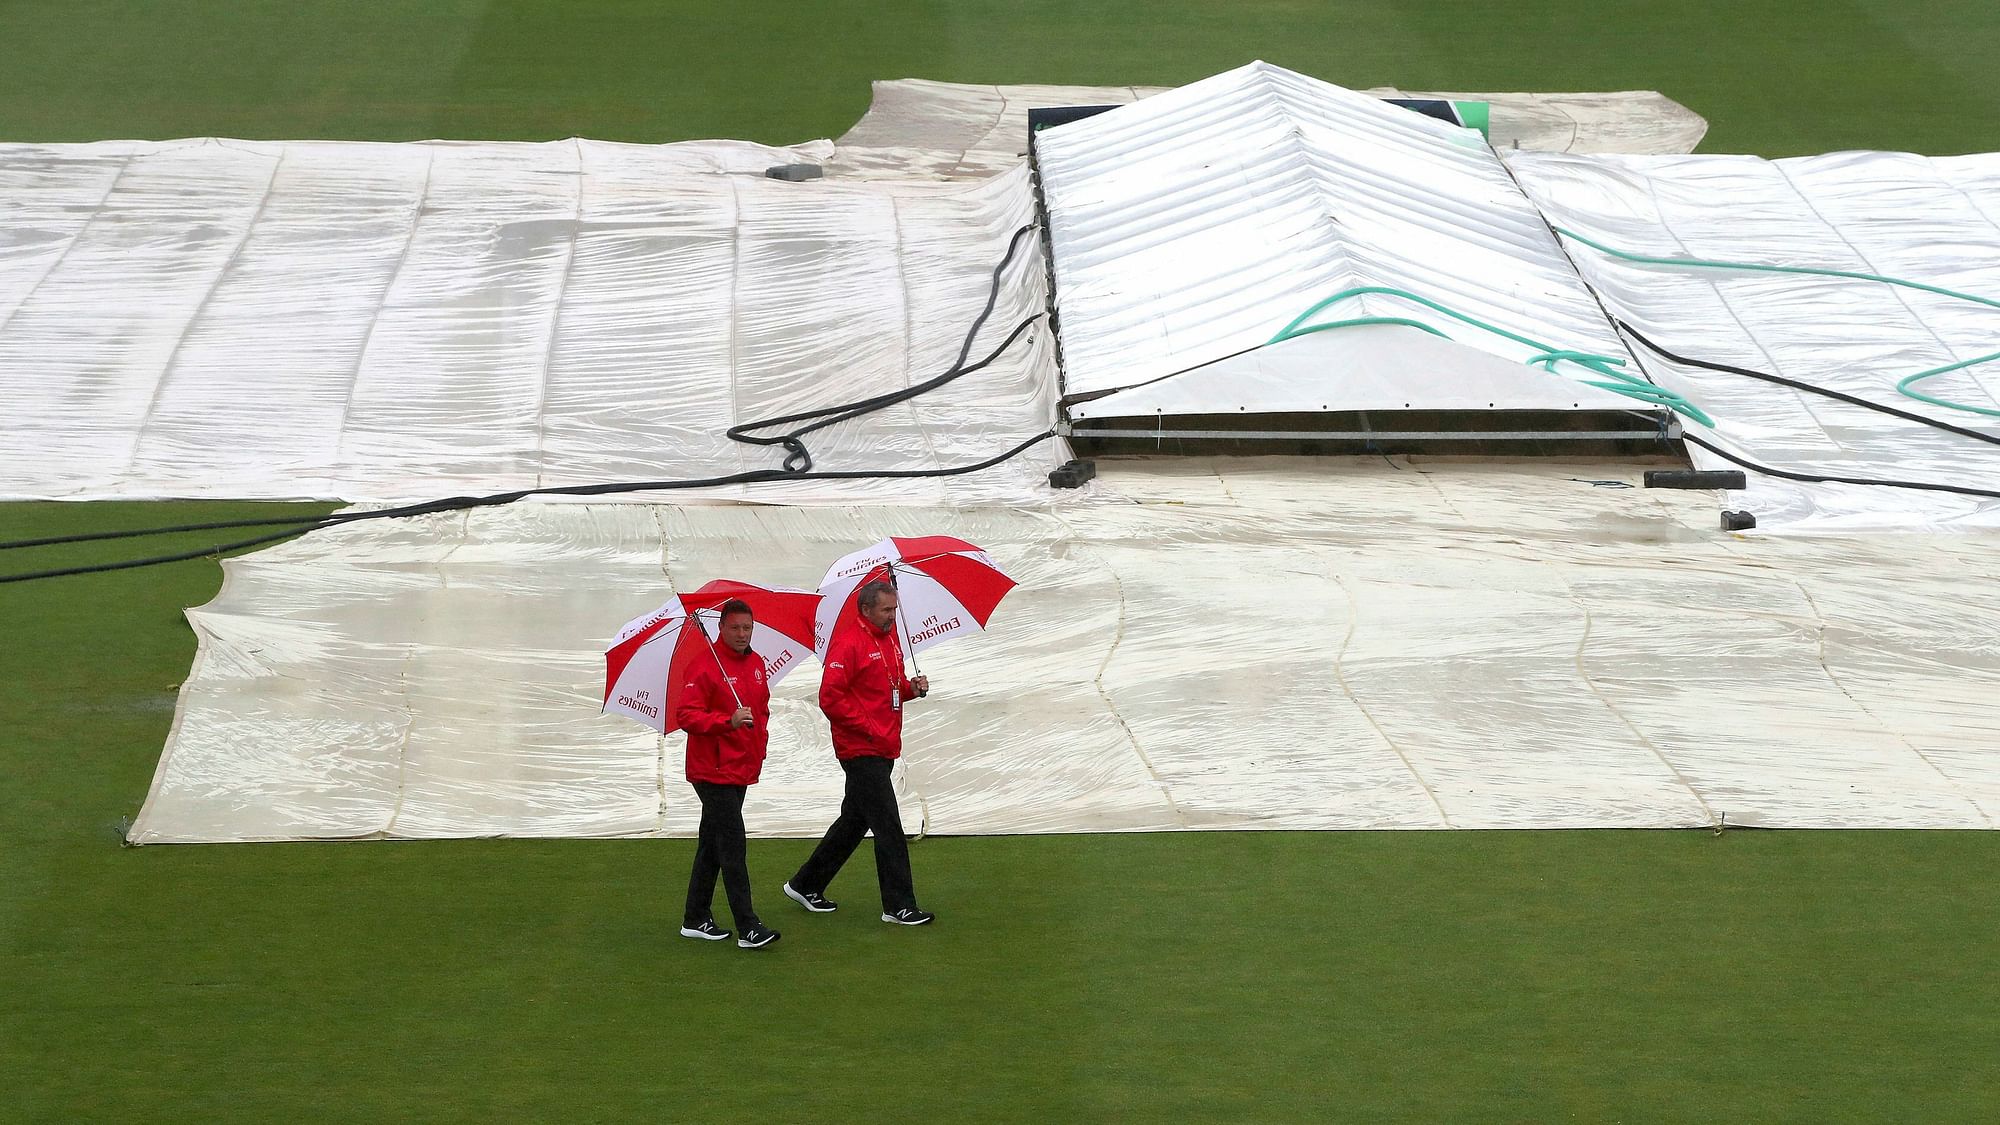 The Bangladesh-Sri Lanka match in Bristol has been abandoned without a ball being bowled.